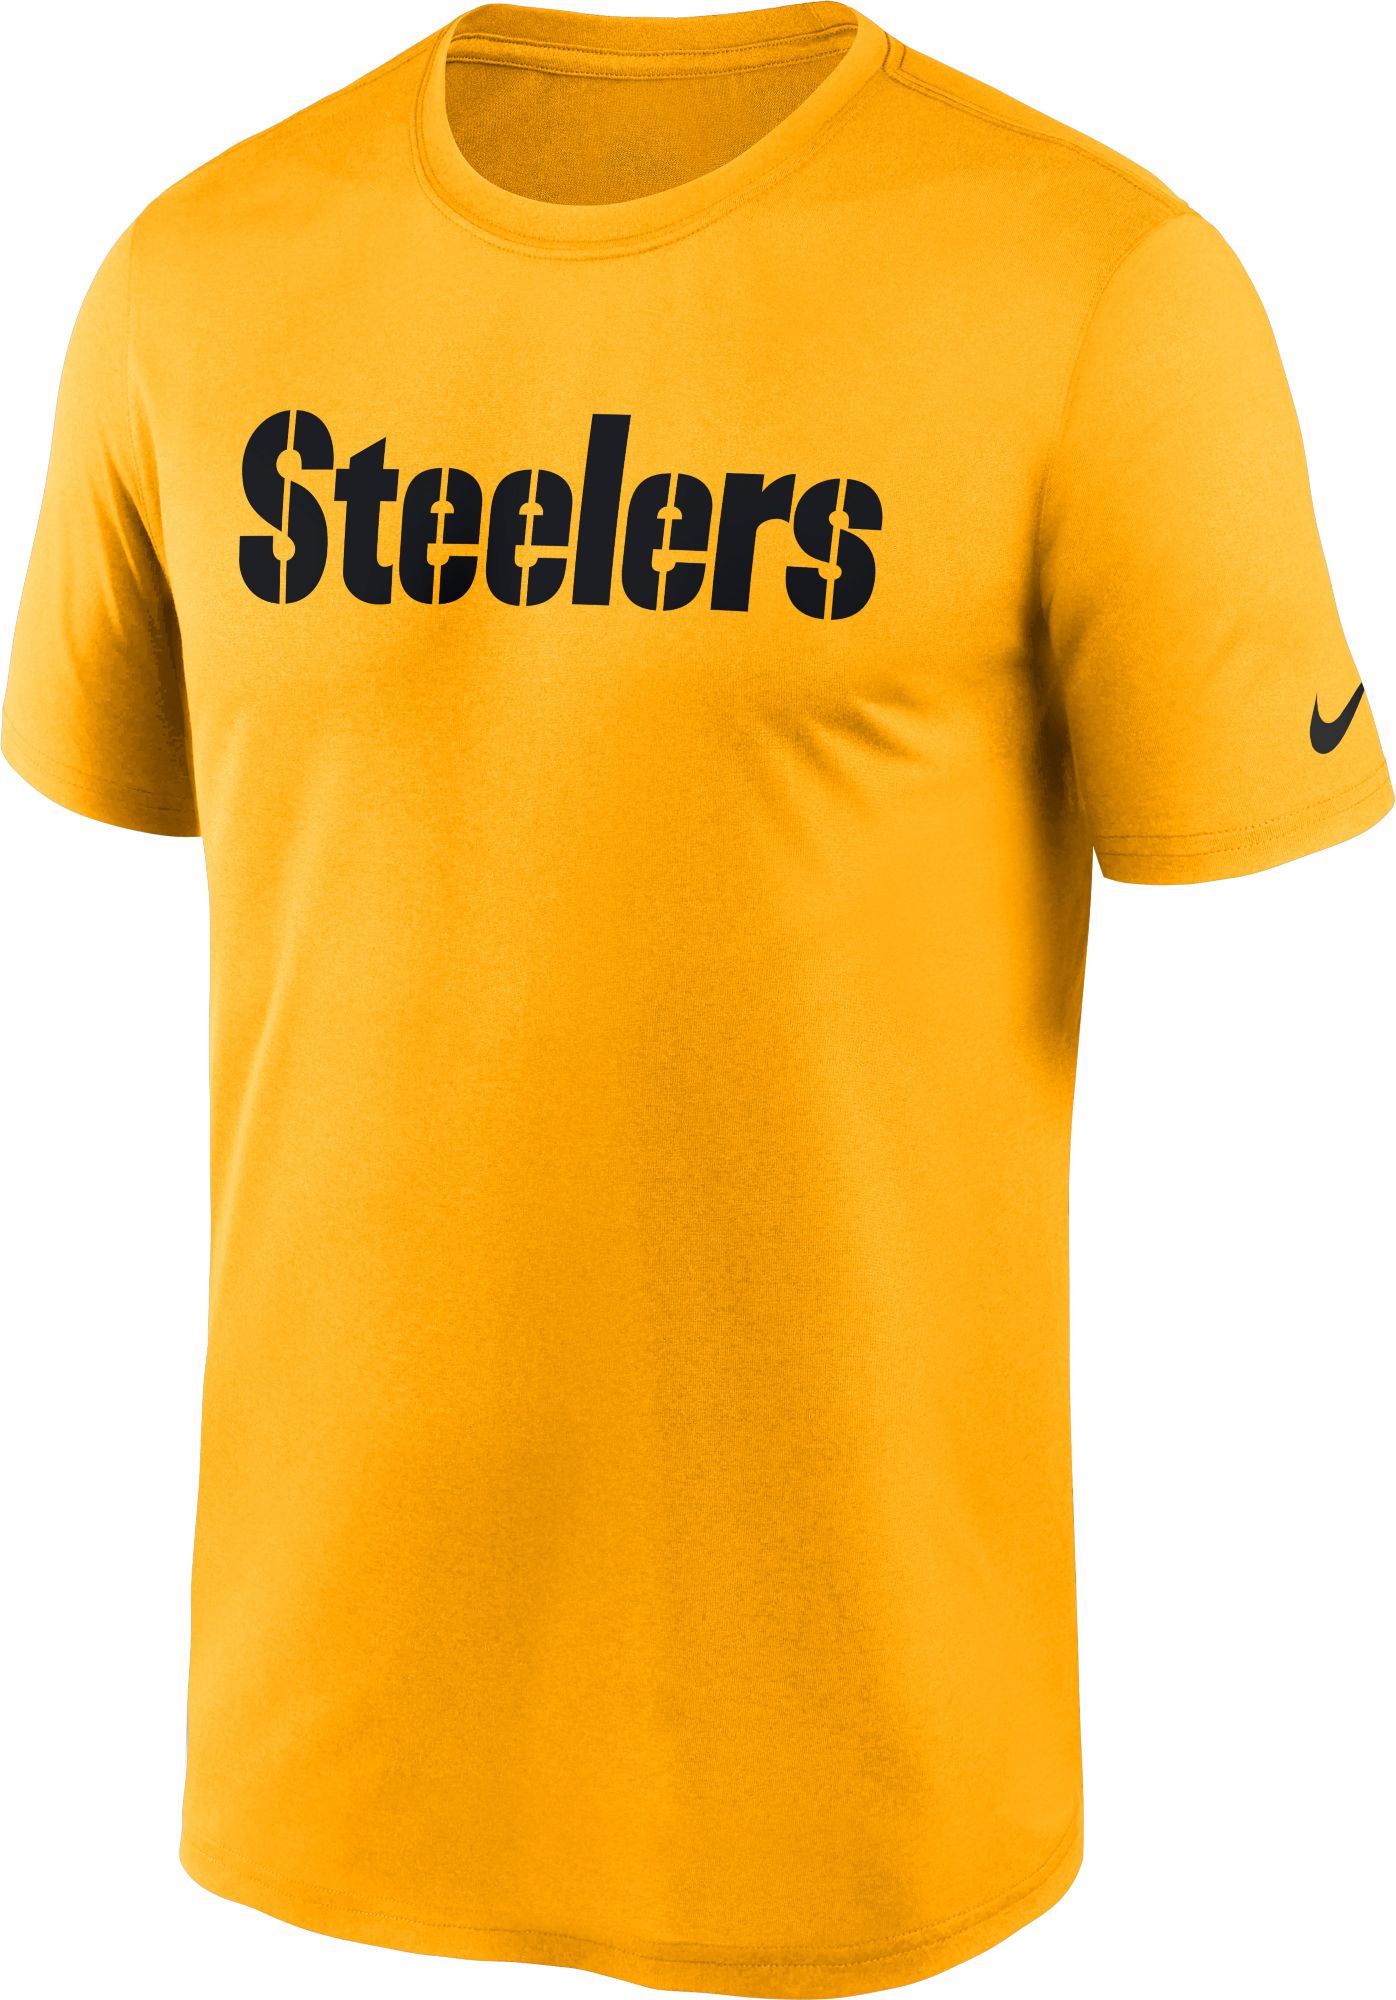 pittsburgh steelers t shirts